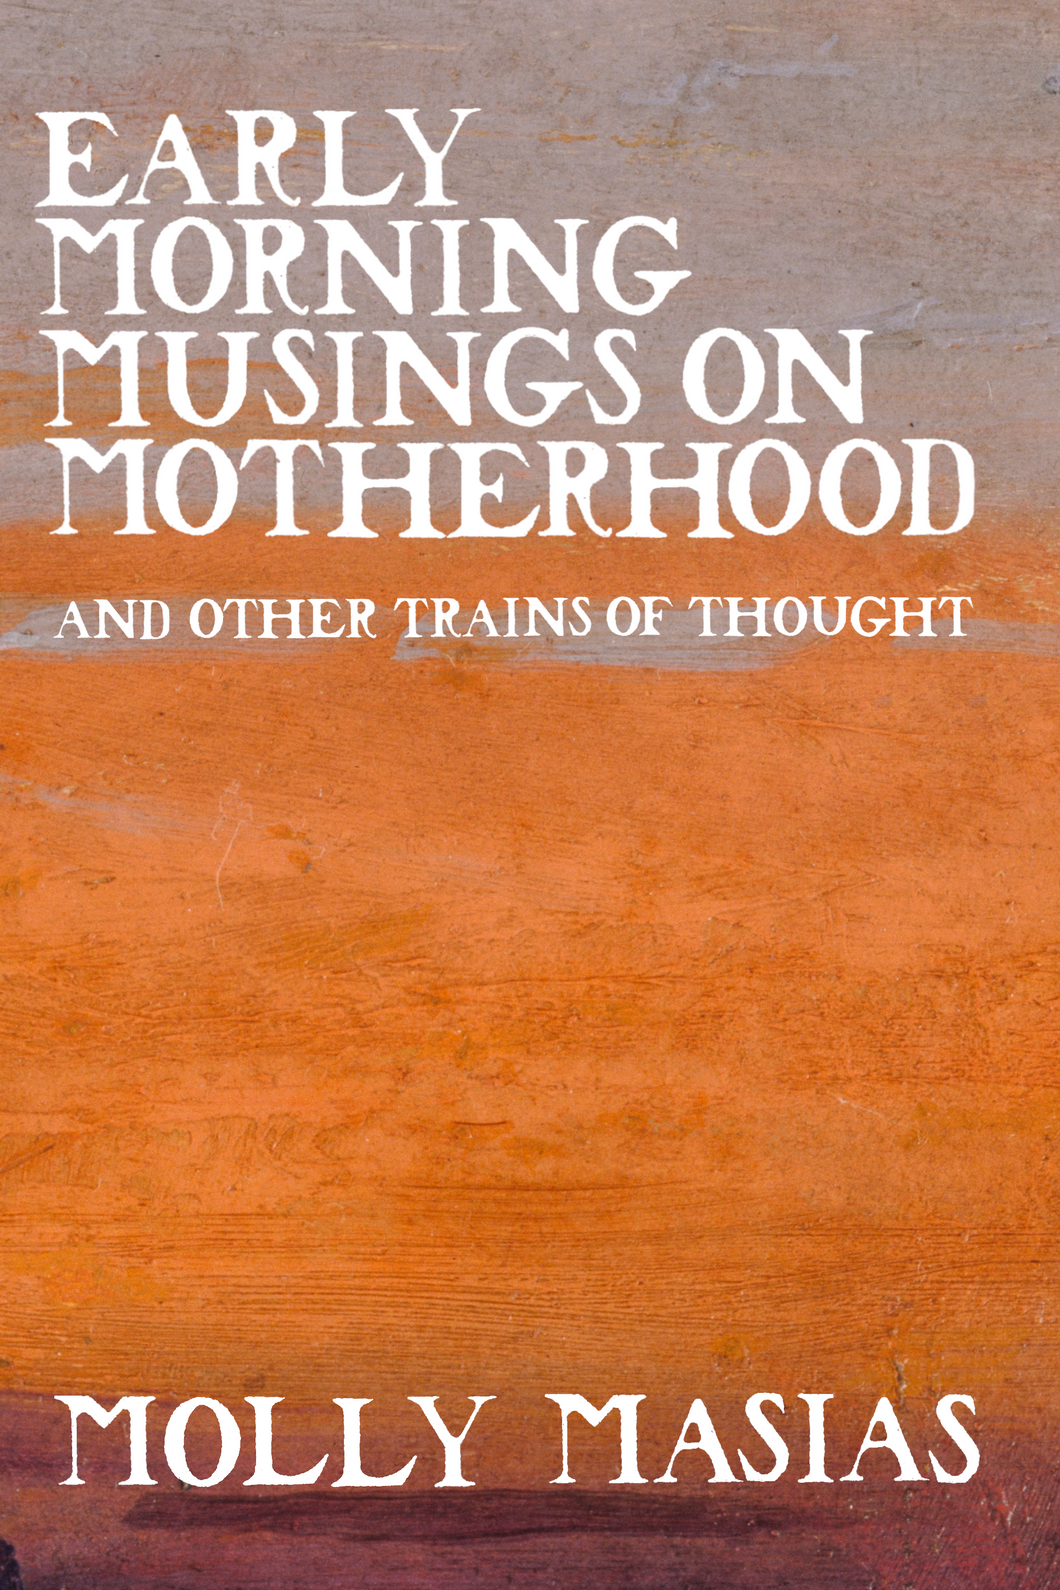 Early Morning Musings on Motherhood and Other Trains of Thought, by Molly Masias-Print Books-Bottlecap Press